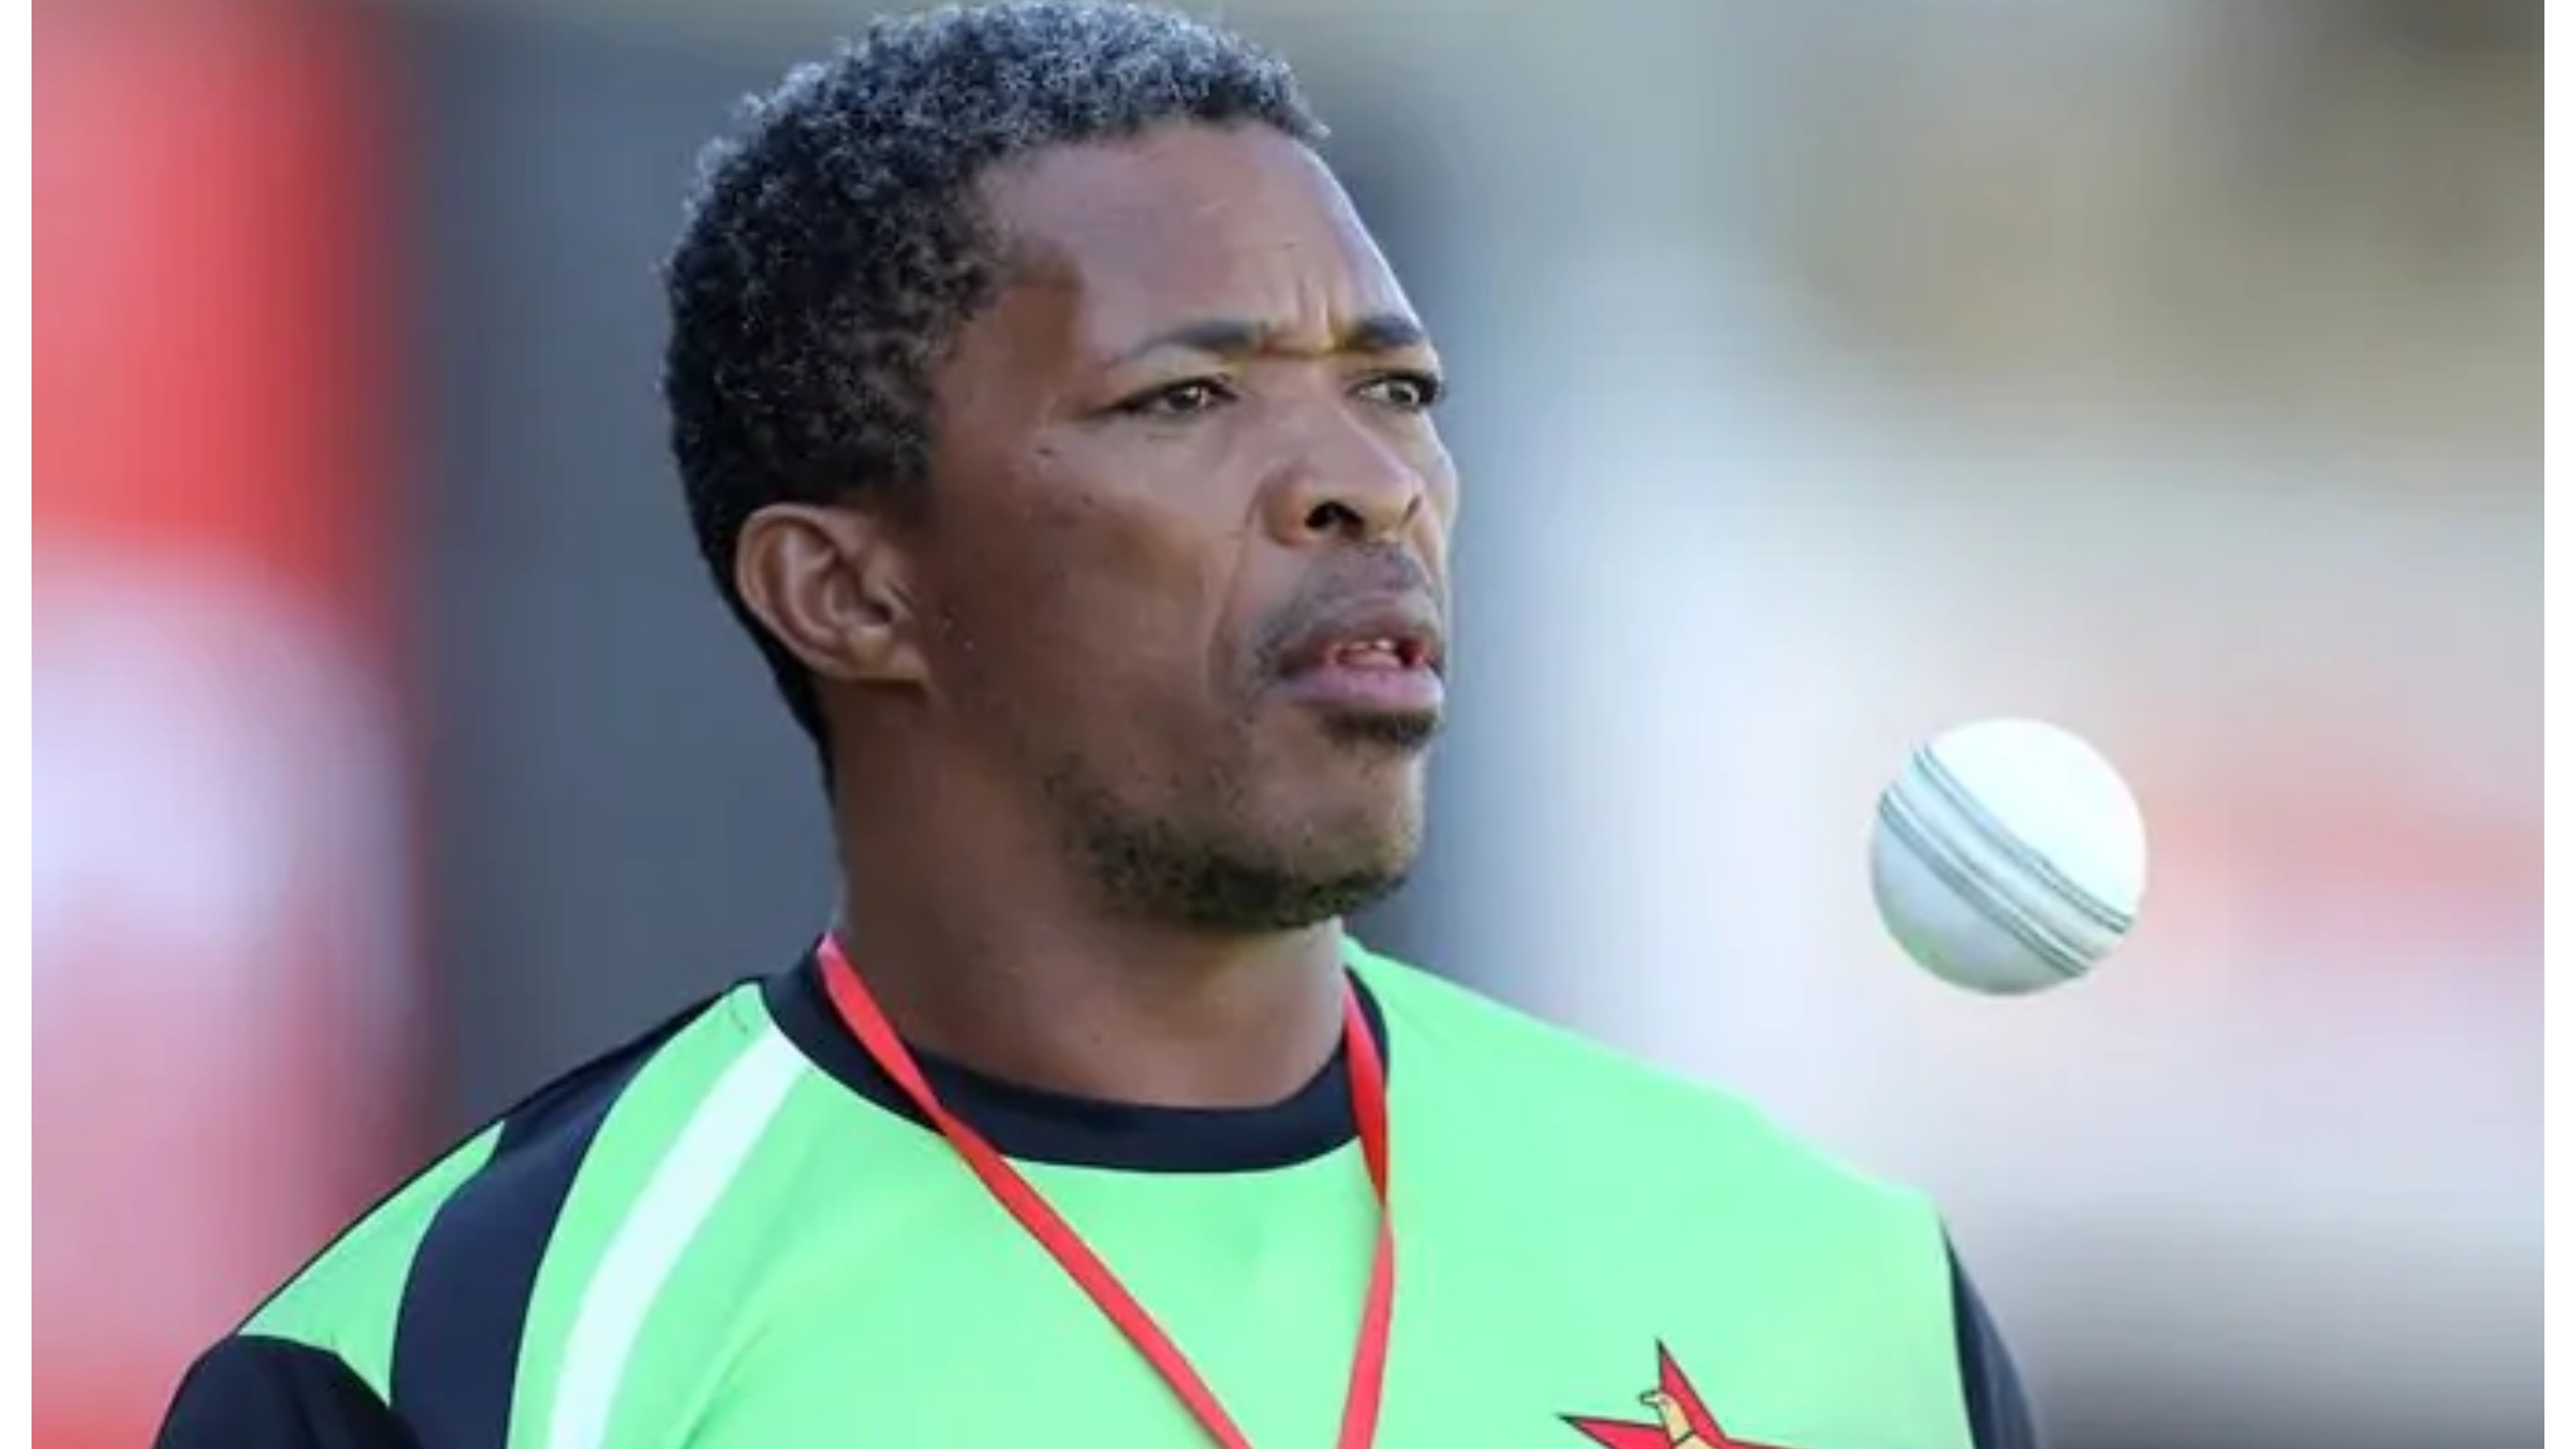 ‘Nobody knocked on my door to go for dinner’: Makhaya Ntini recalls racism in South African cricket